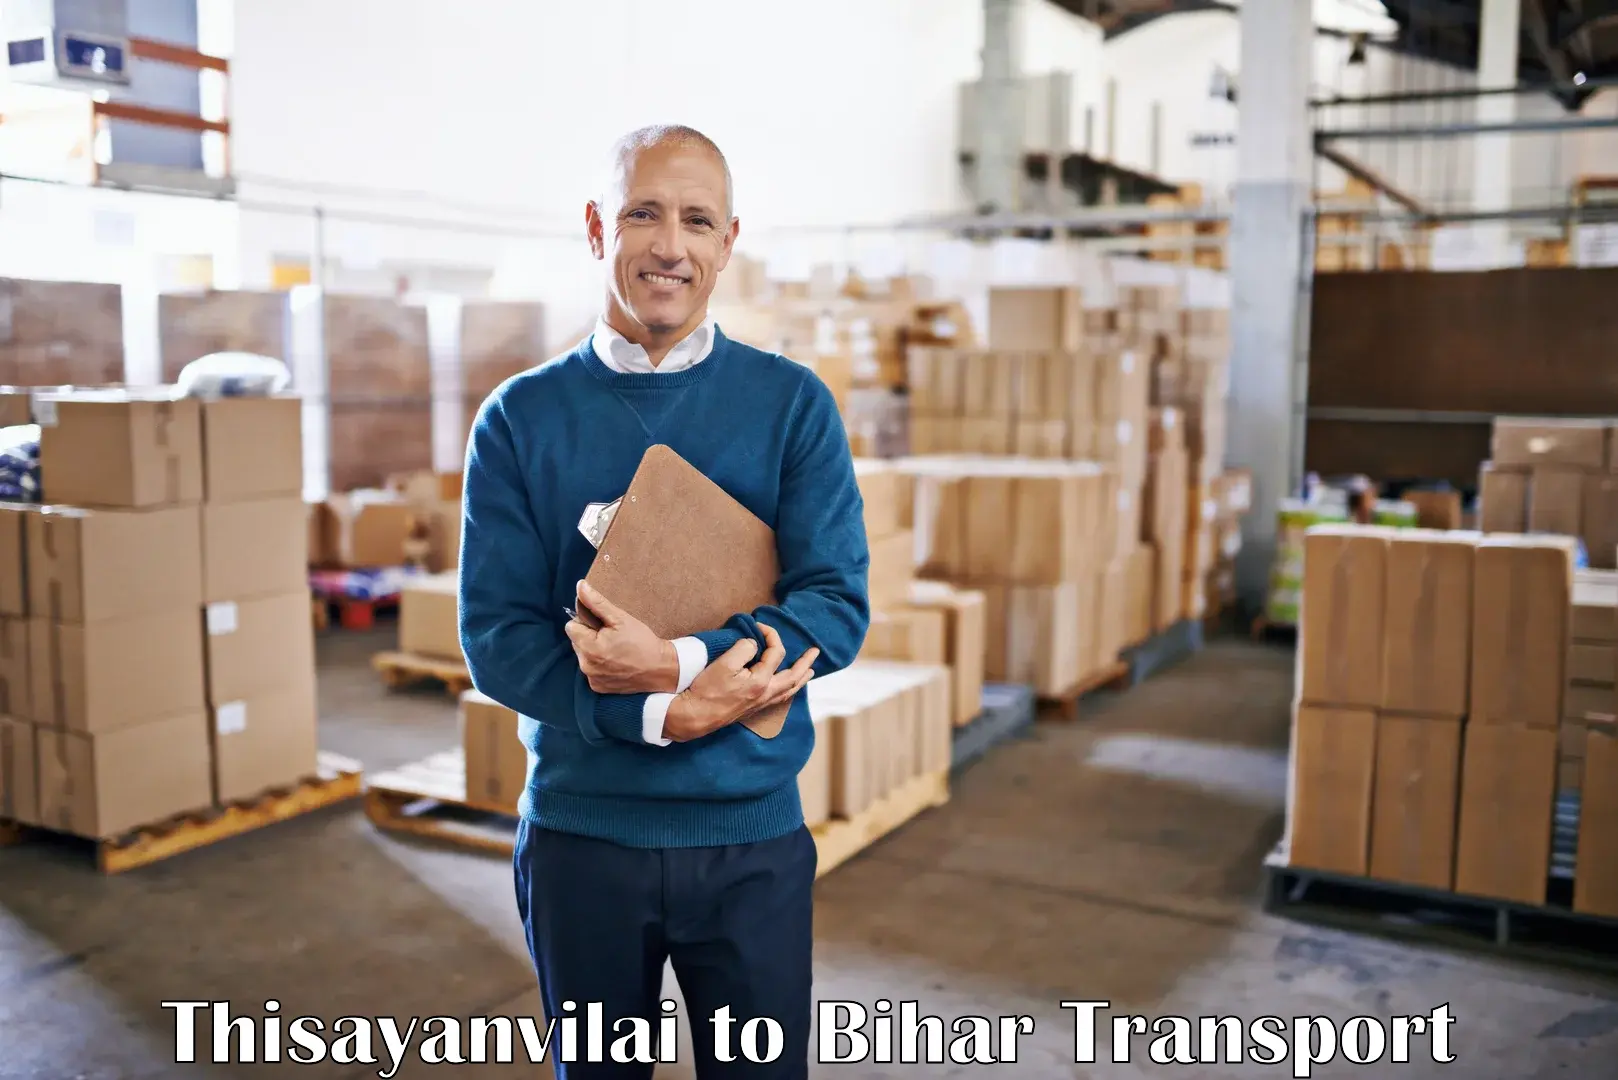 Commercial transport service Thisayanvilai to Fatwah